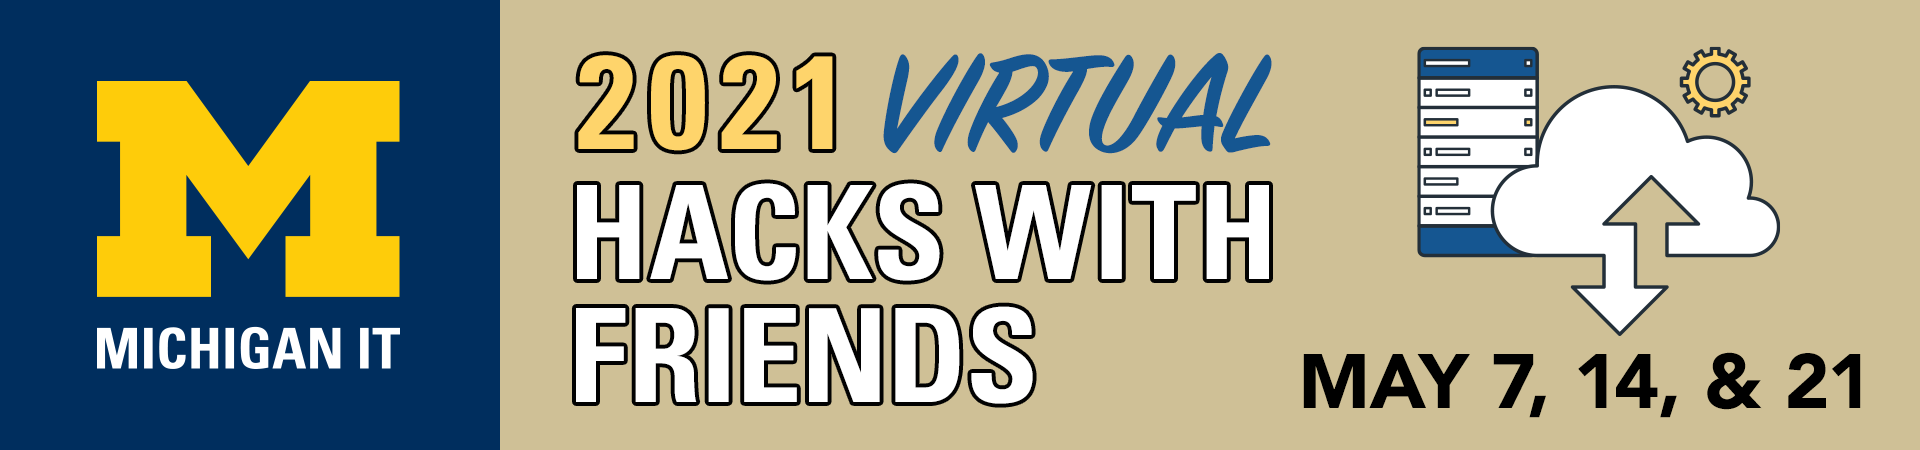 Hacks with Friends 2021 - May 7, 14, & 21